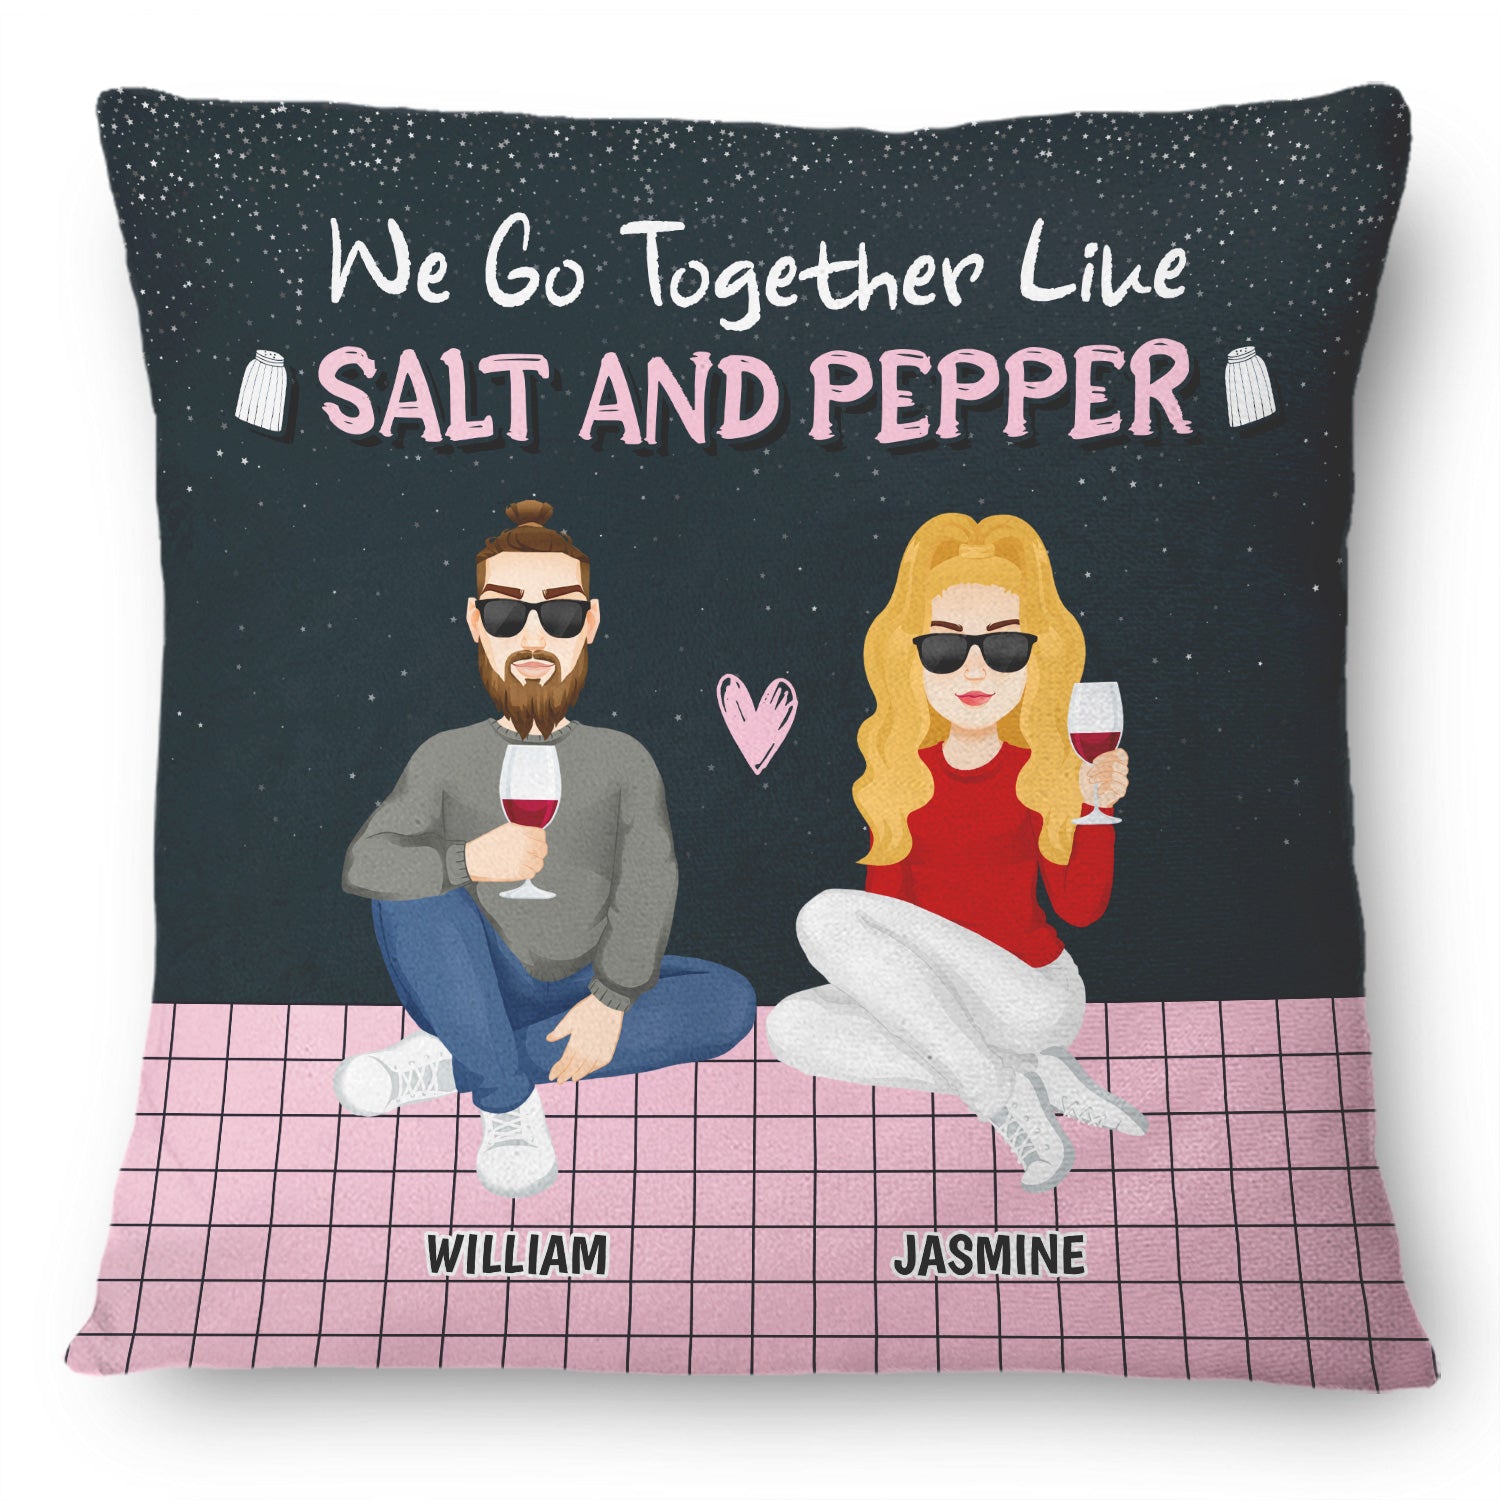 Like Salt And Pepper - Gift For Couples - Personalized Pillow